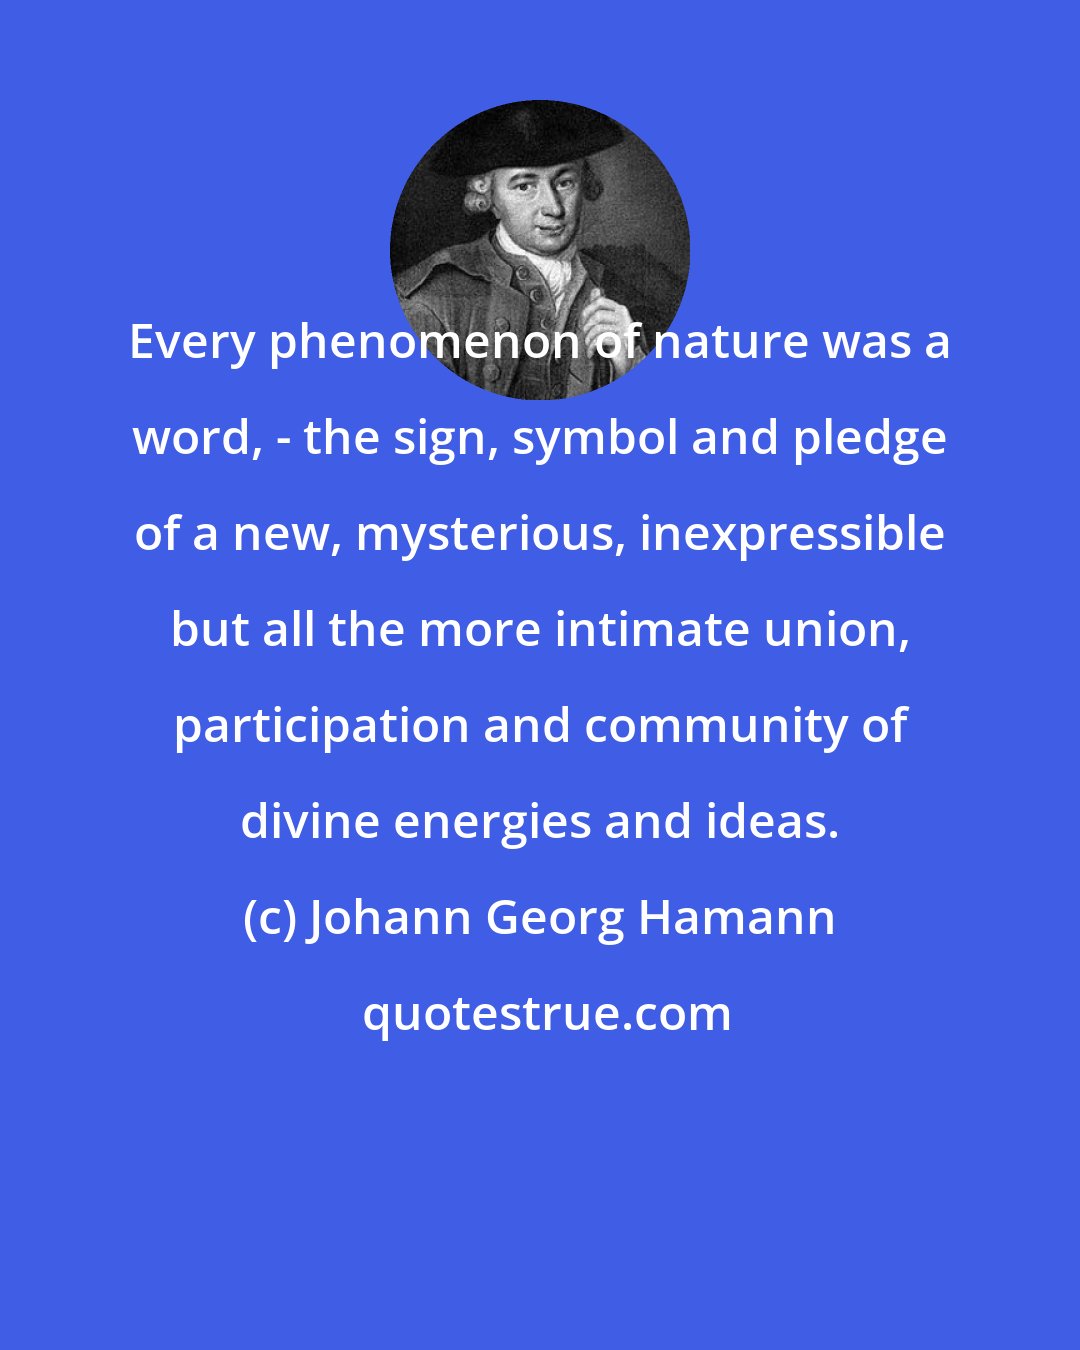 Johann Georg Hamann: Every phenomenon of nature was a word, - the sign, symbol and pledge of a new, mysterious, inexpressible but all the more intimate union, participation and community of divine energies and ideas.